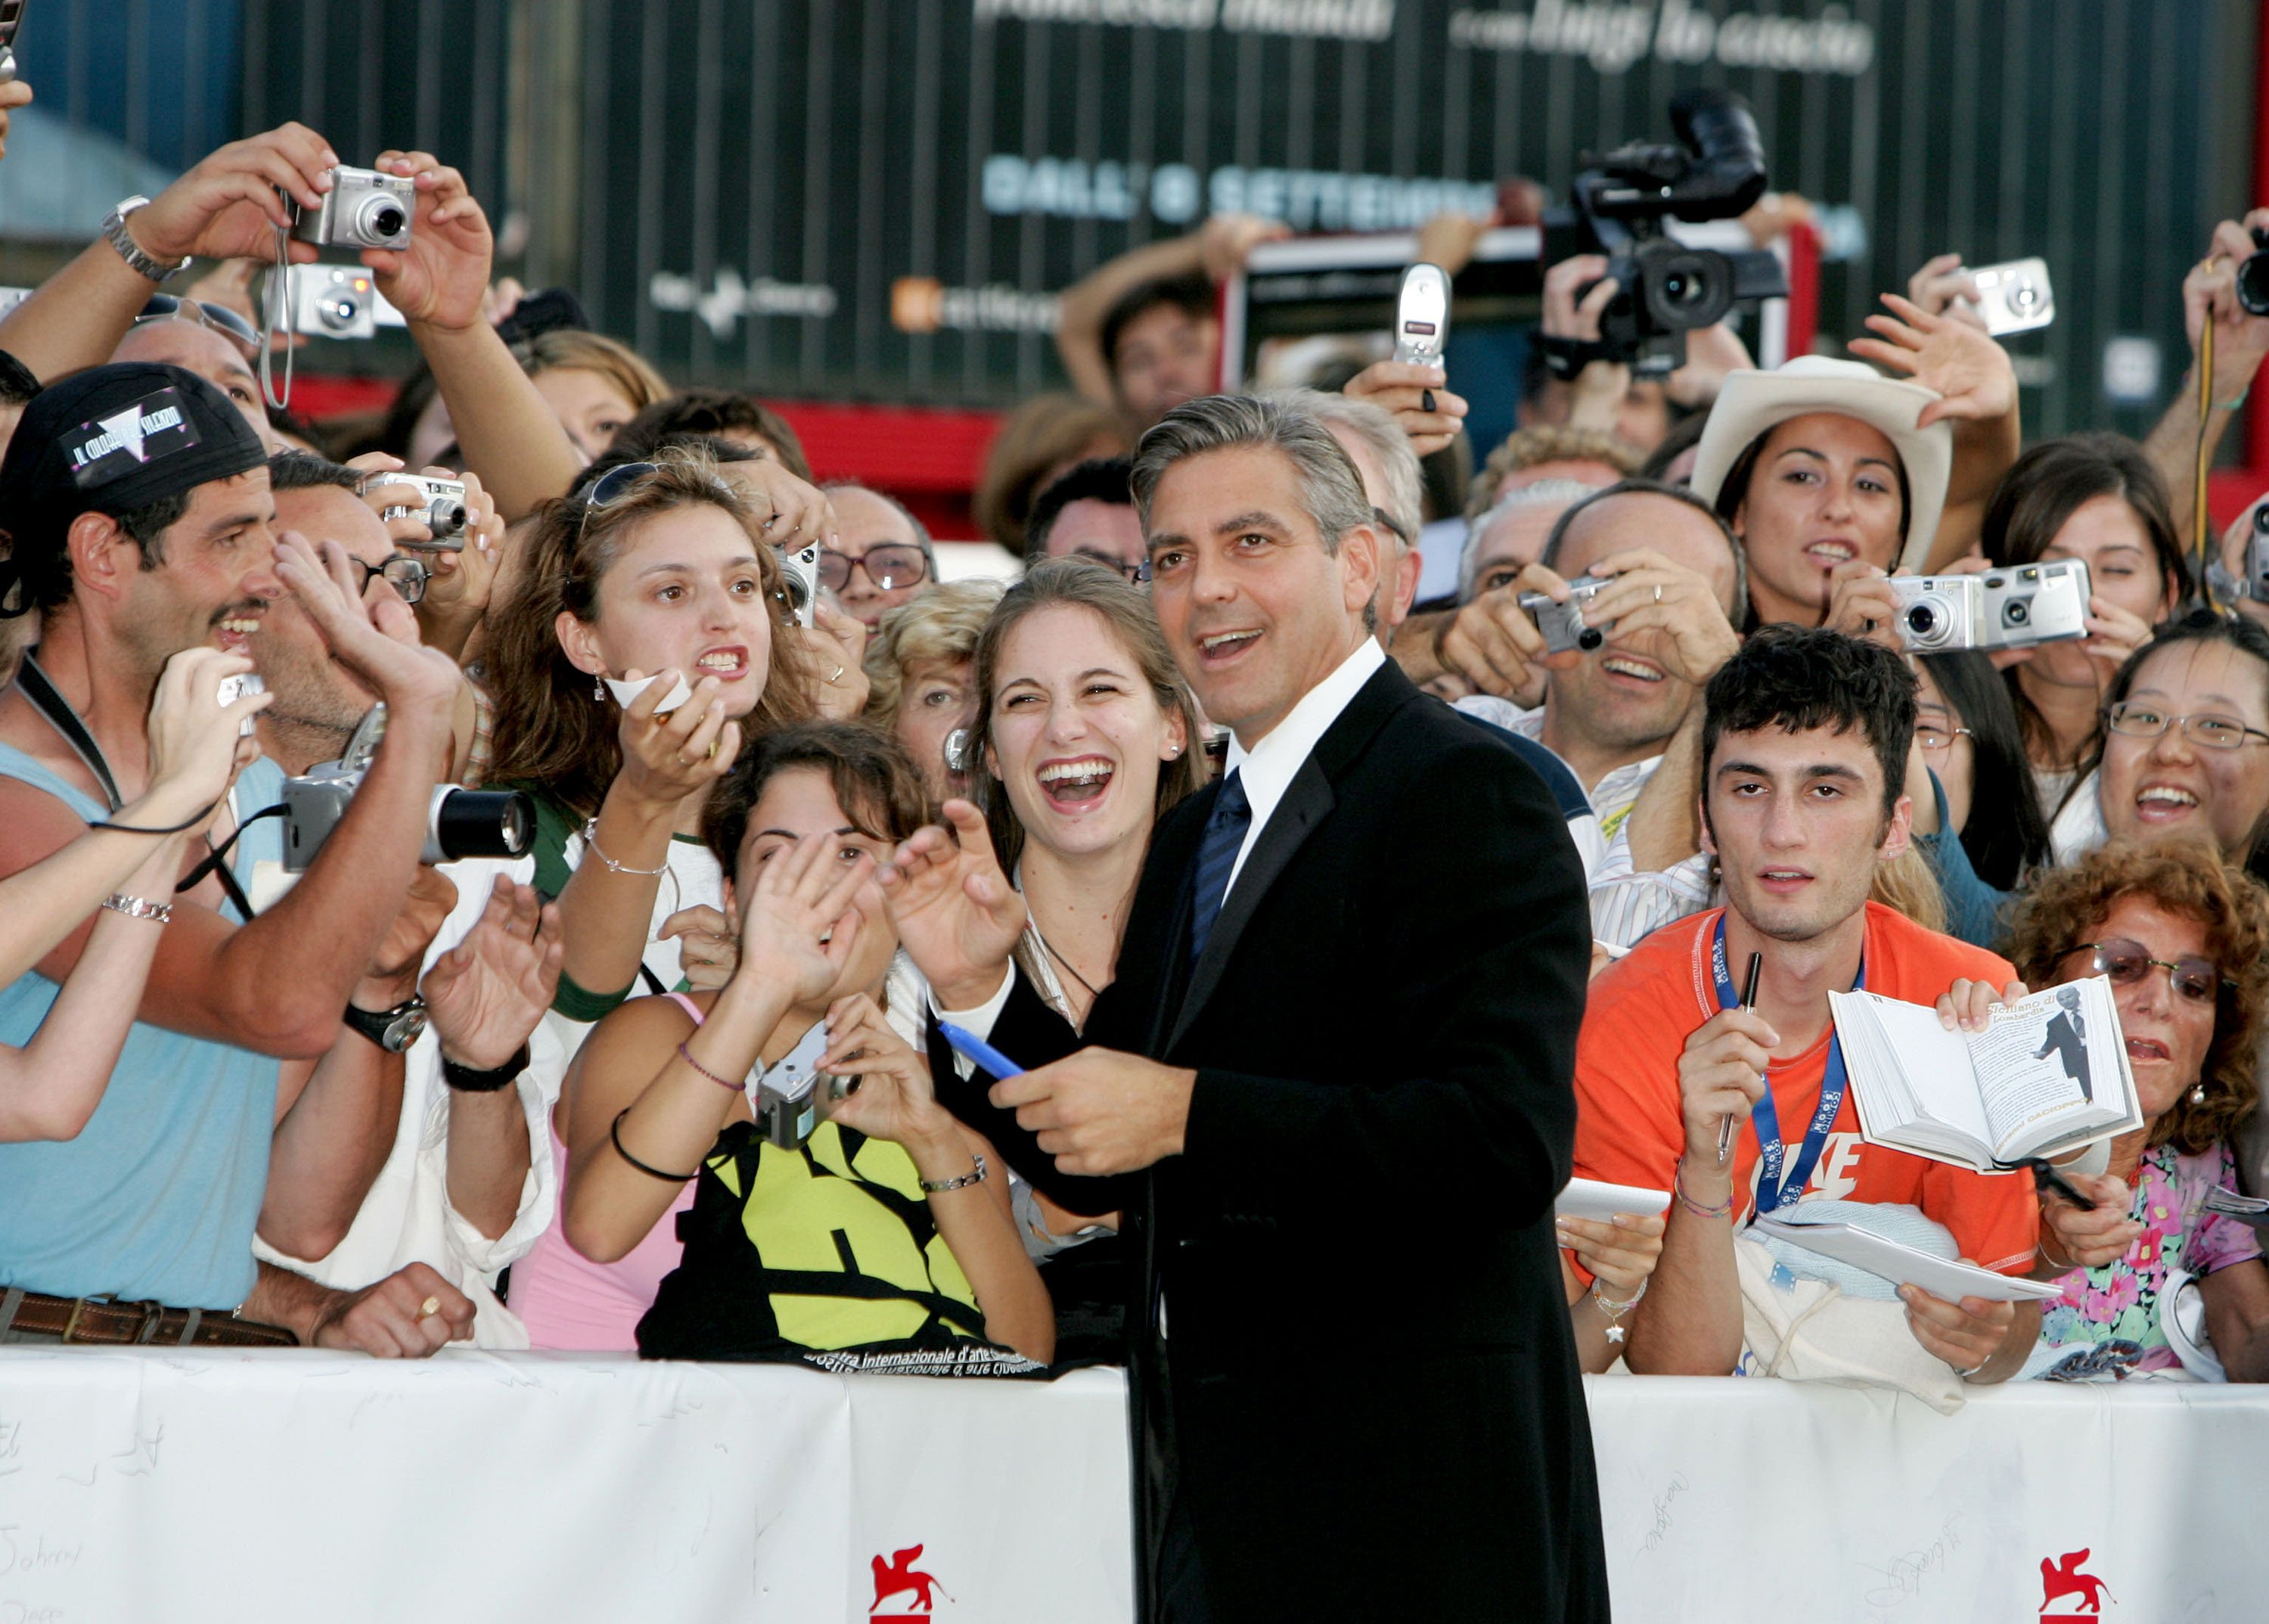 Director and screenwriter George Clooney pictured with fans at the Closing Ceremony Red Carpet event during the 2005 Venice Film Festival. / Source: Getty Images